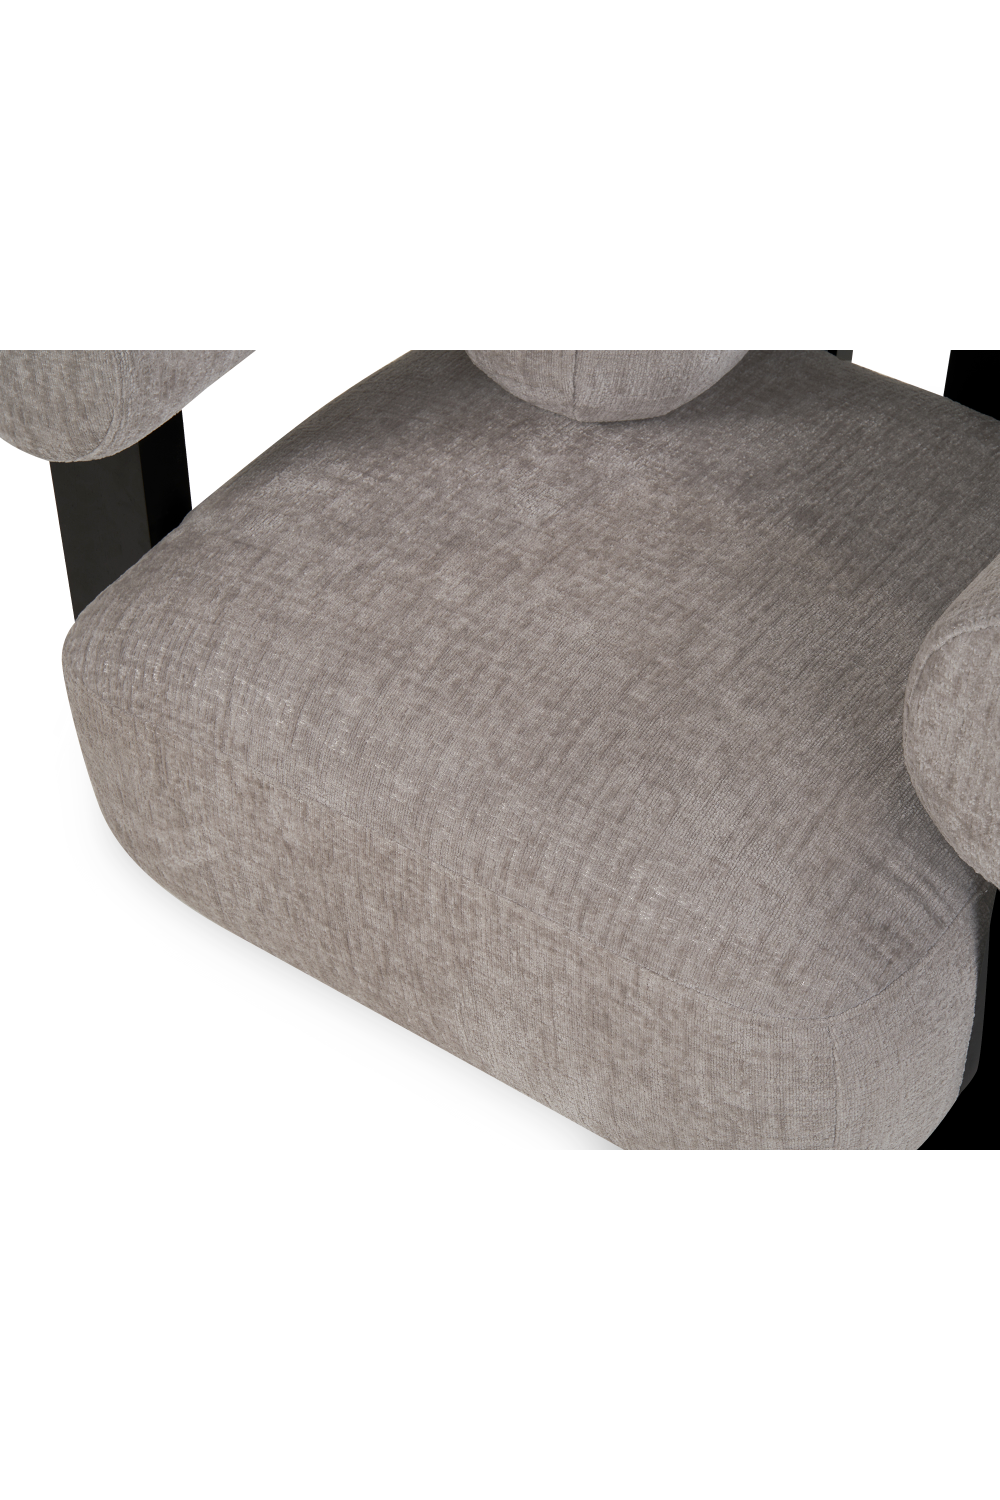 Gray Chenille Accent Arcmchair | Liang & Eimil Epic | Oroa.com